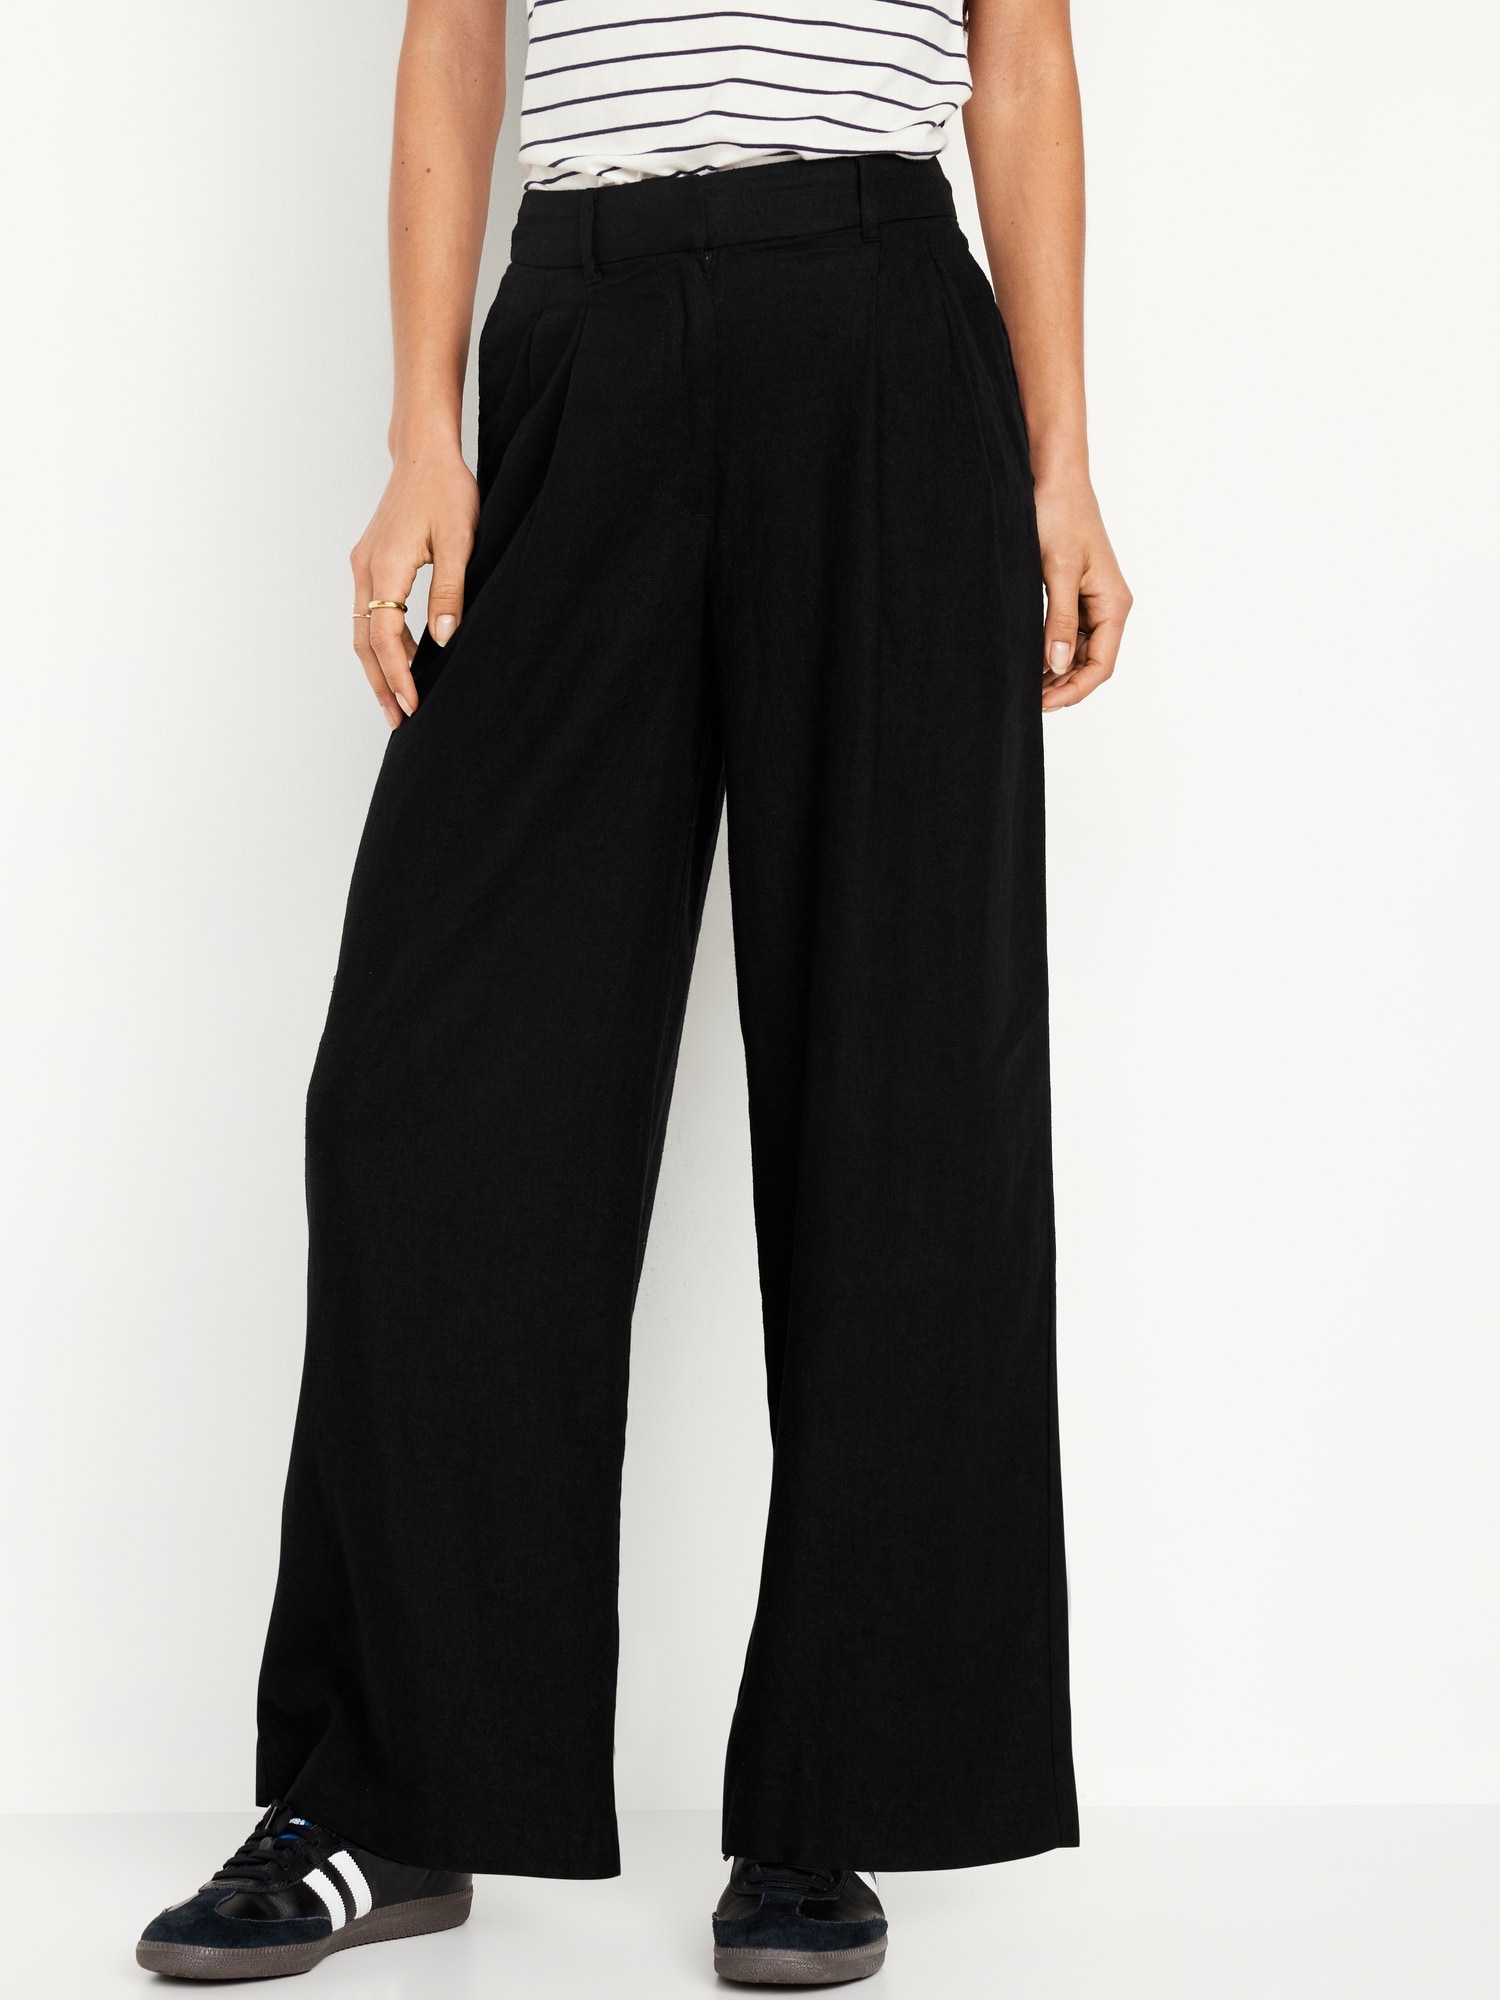 Long Pants For Tall Ladies